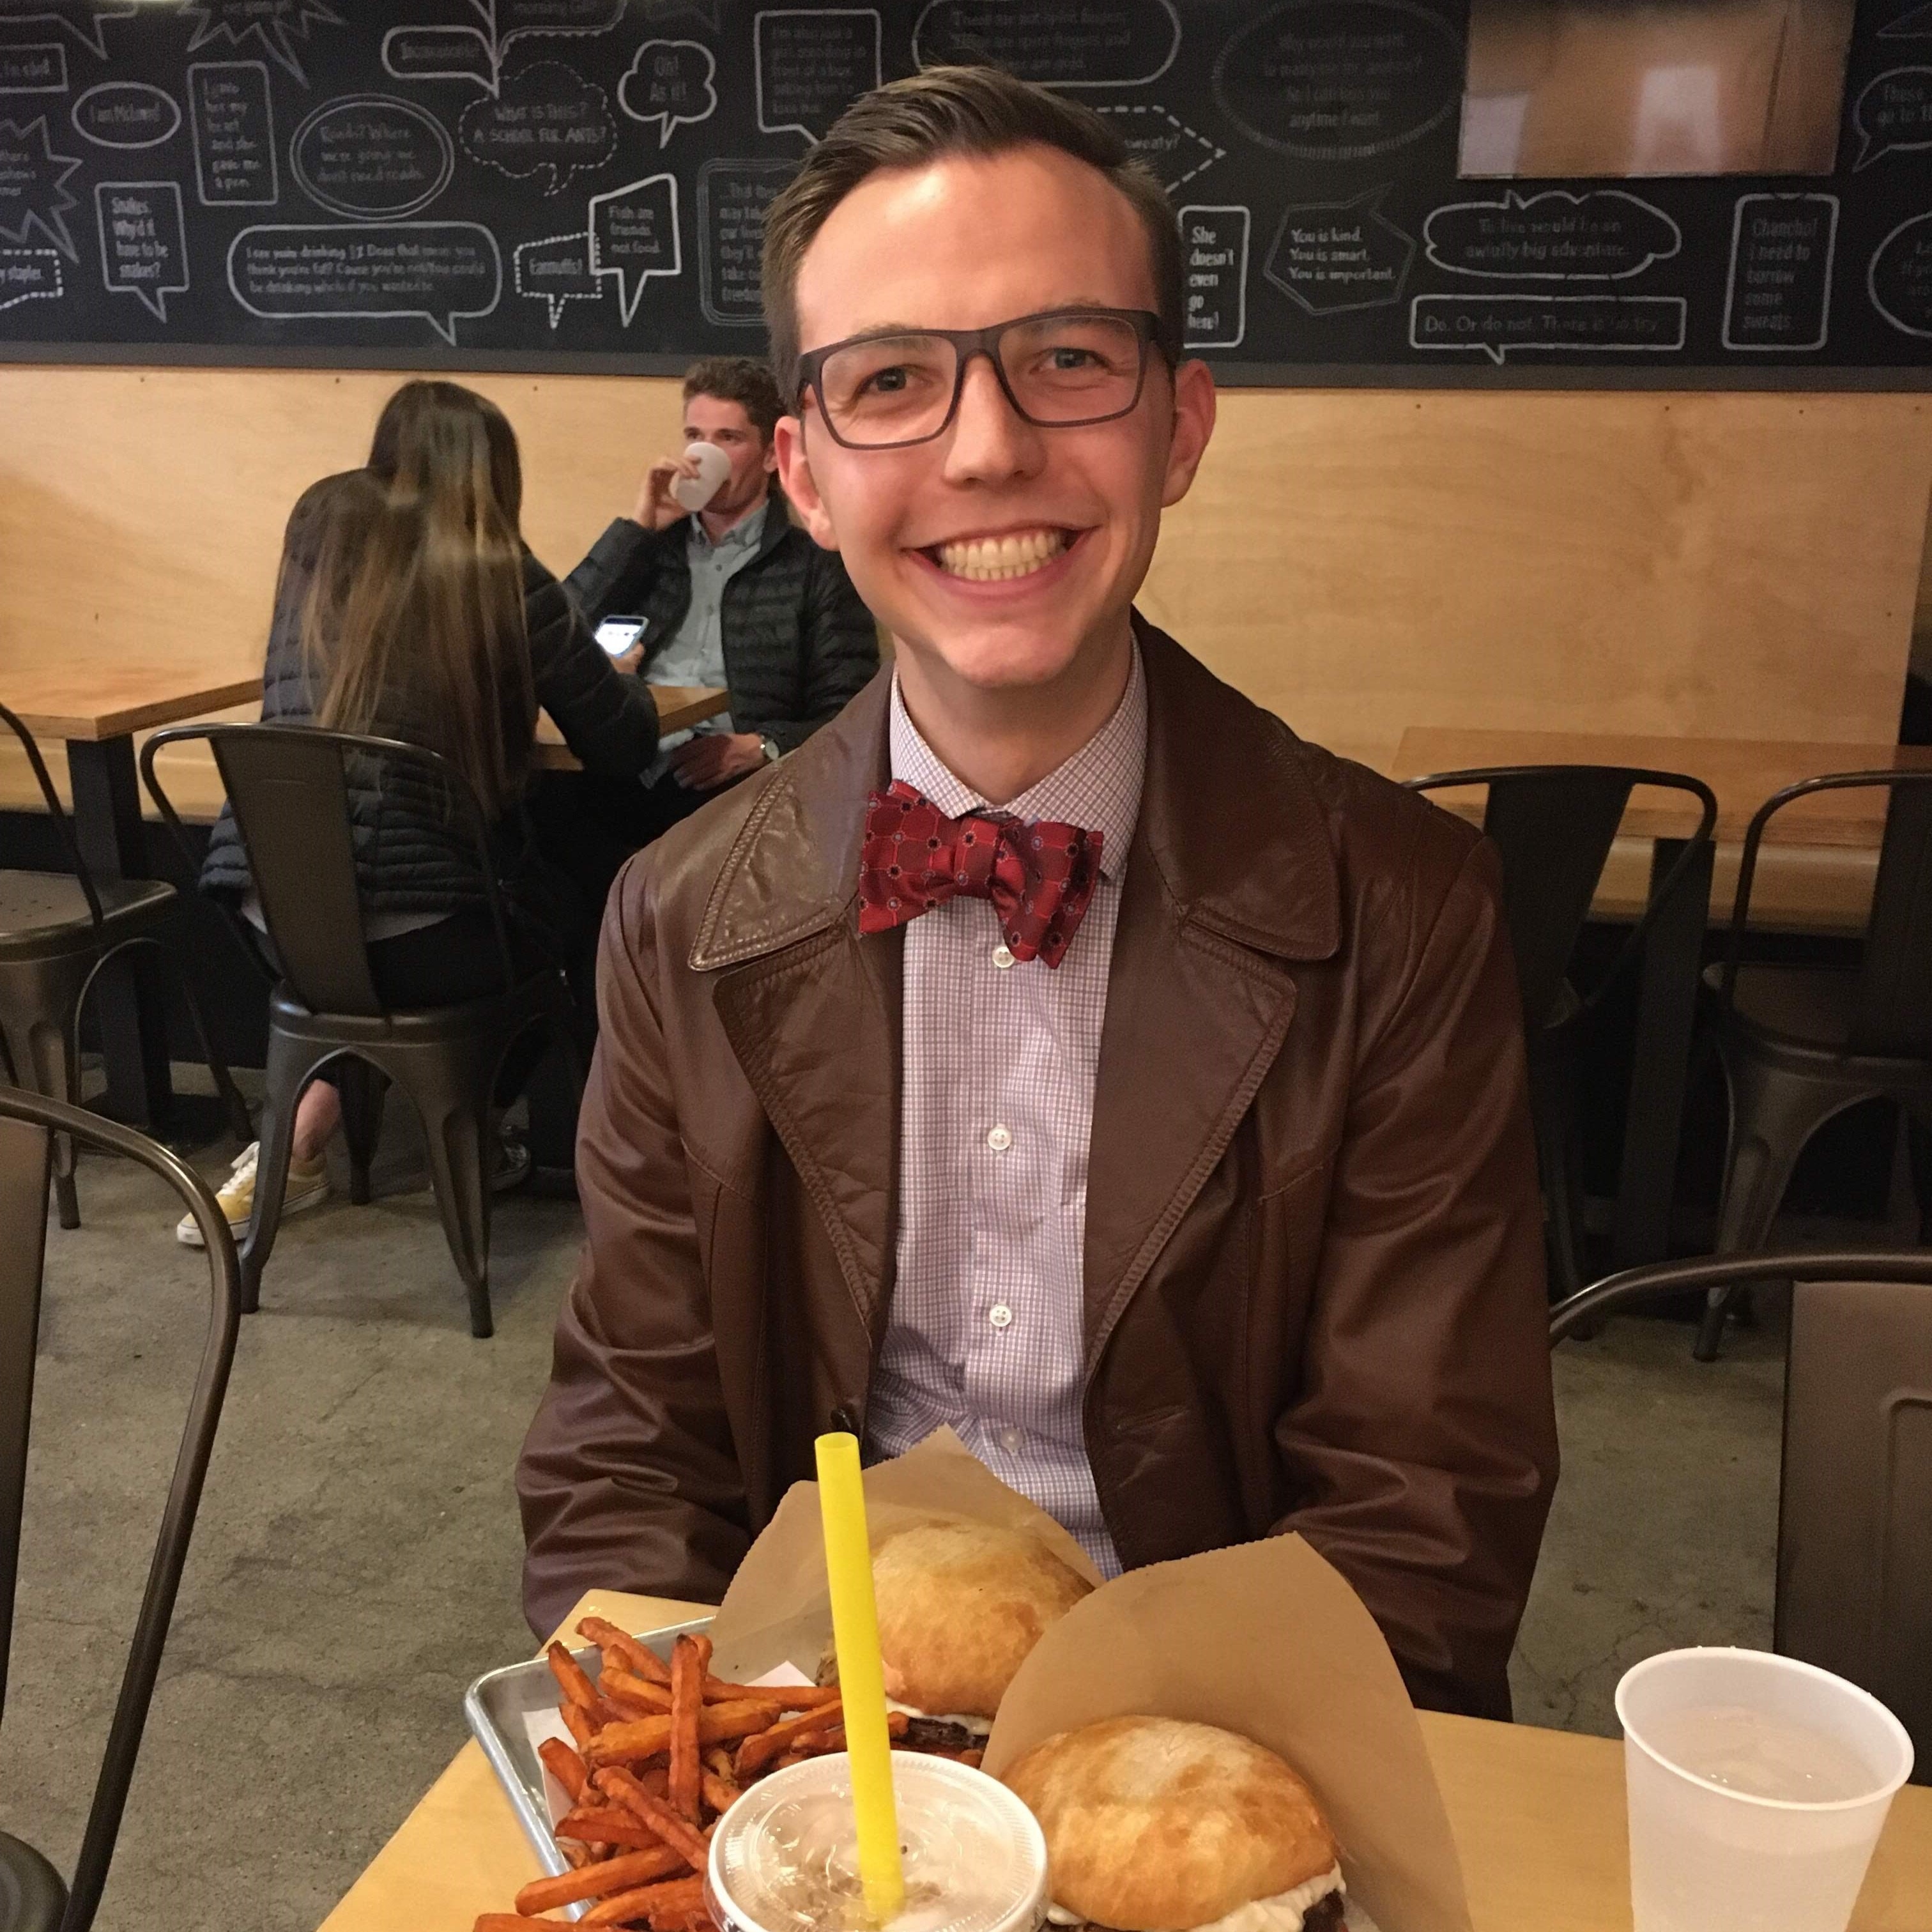 Photo of me, well dressed, in an upscale food court